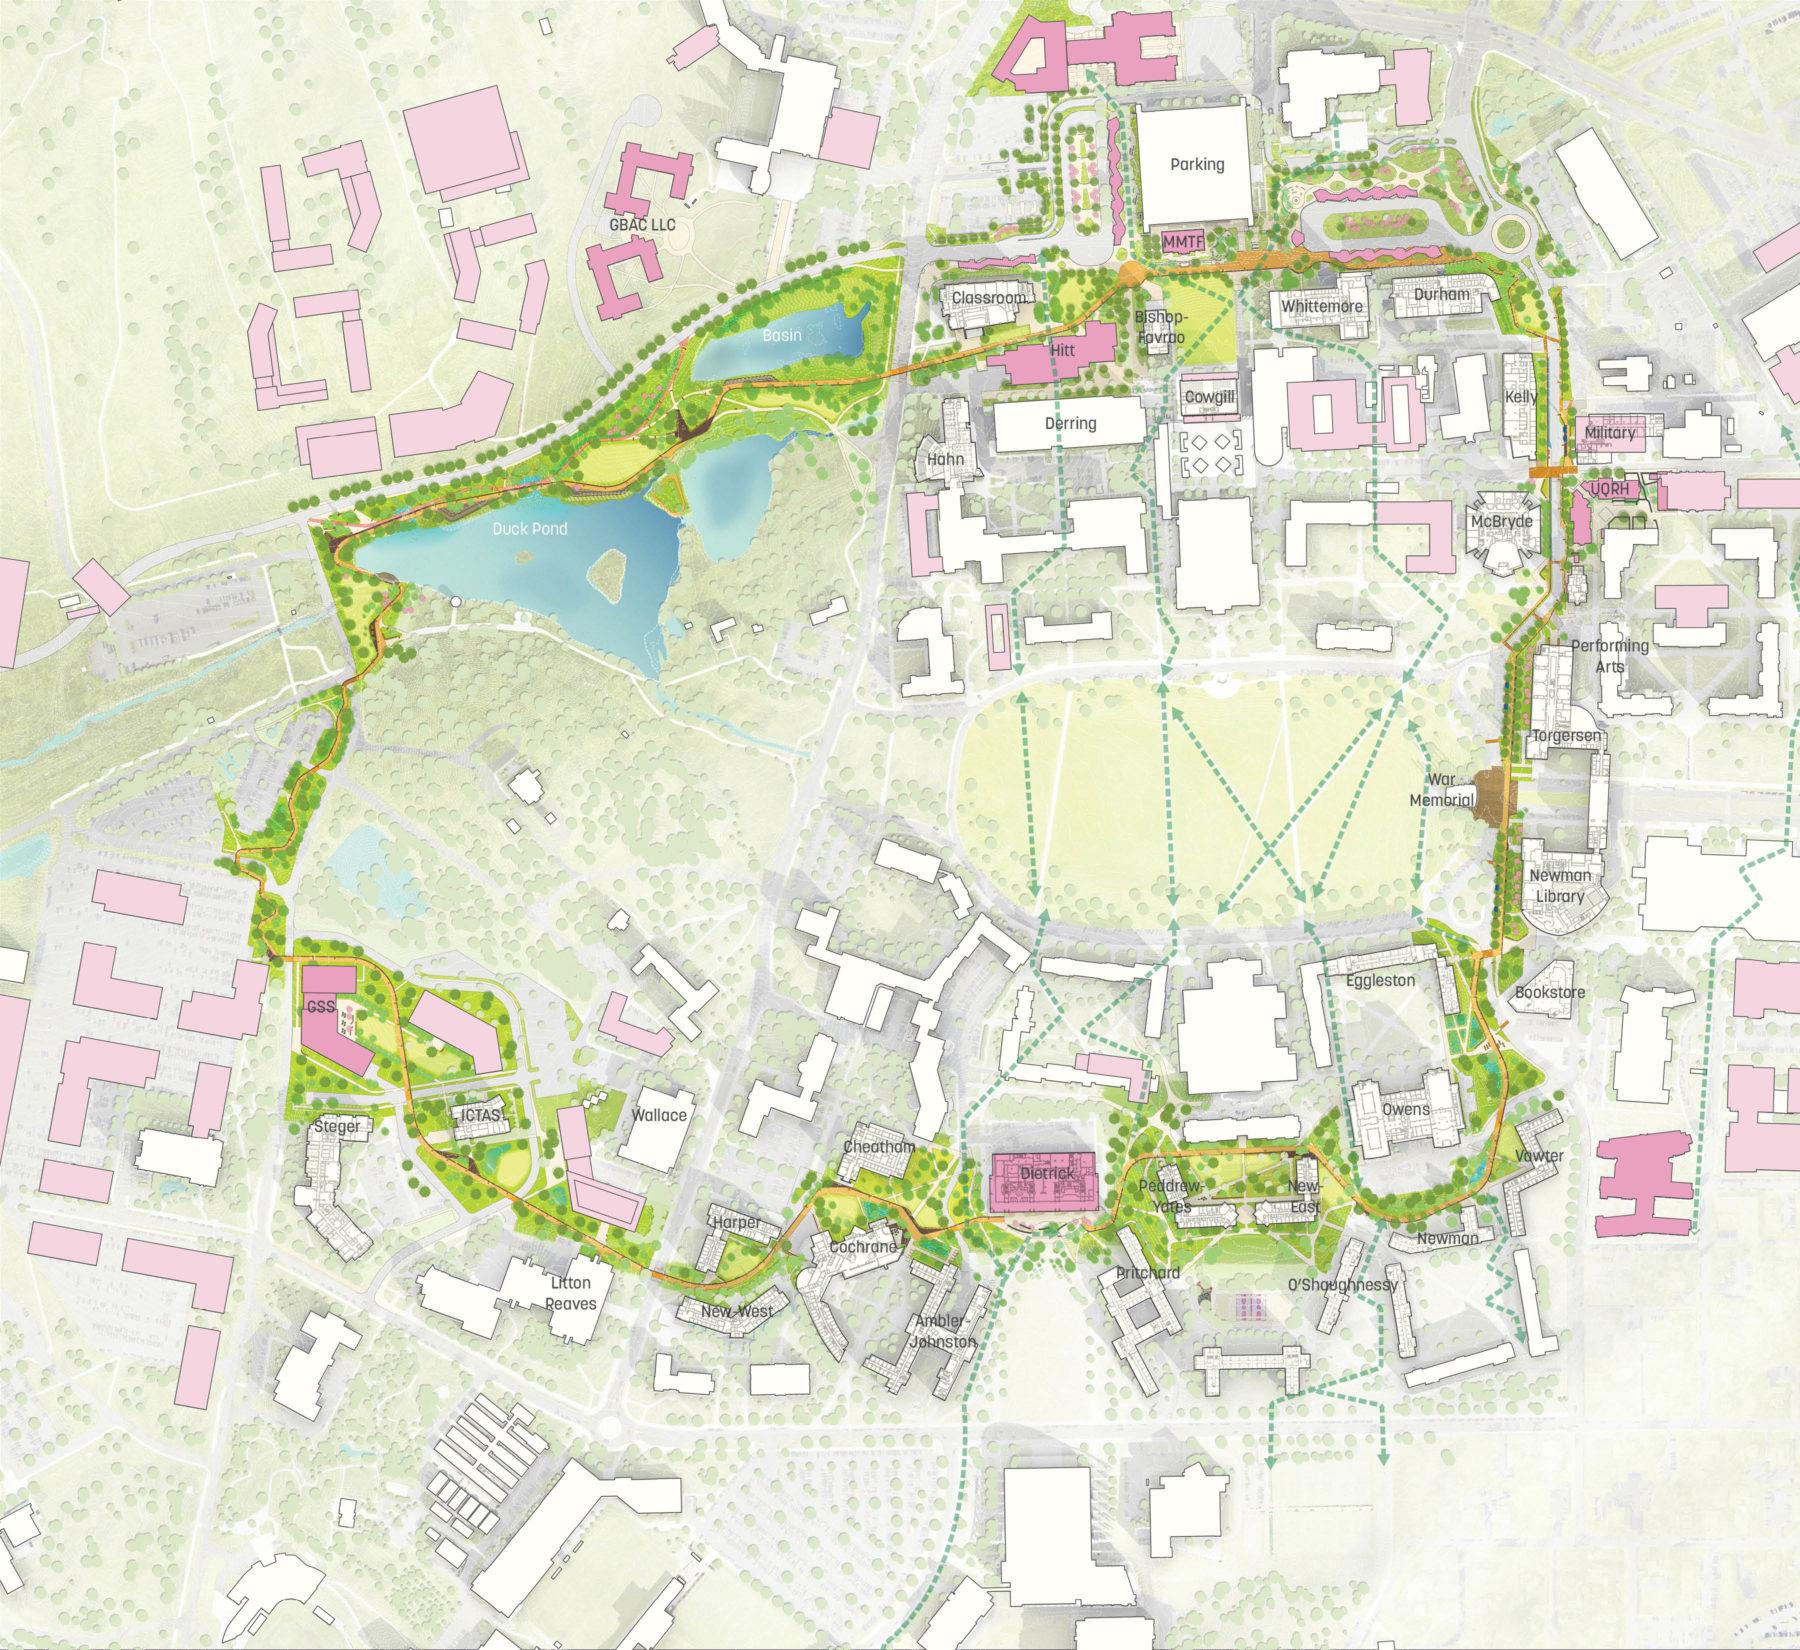 Diagram that shows the Infinite Loop, a 2.1-mile multi-modal, barrier-free corridor that connects Virginia Tech’s past, present, and future.